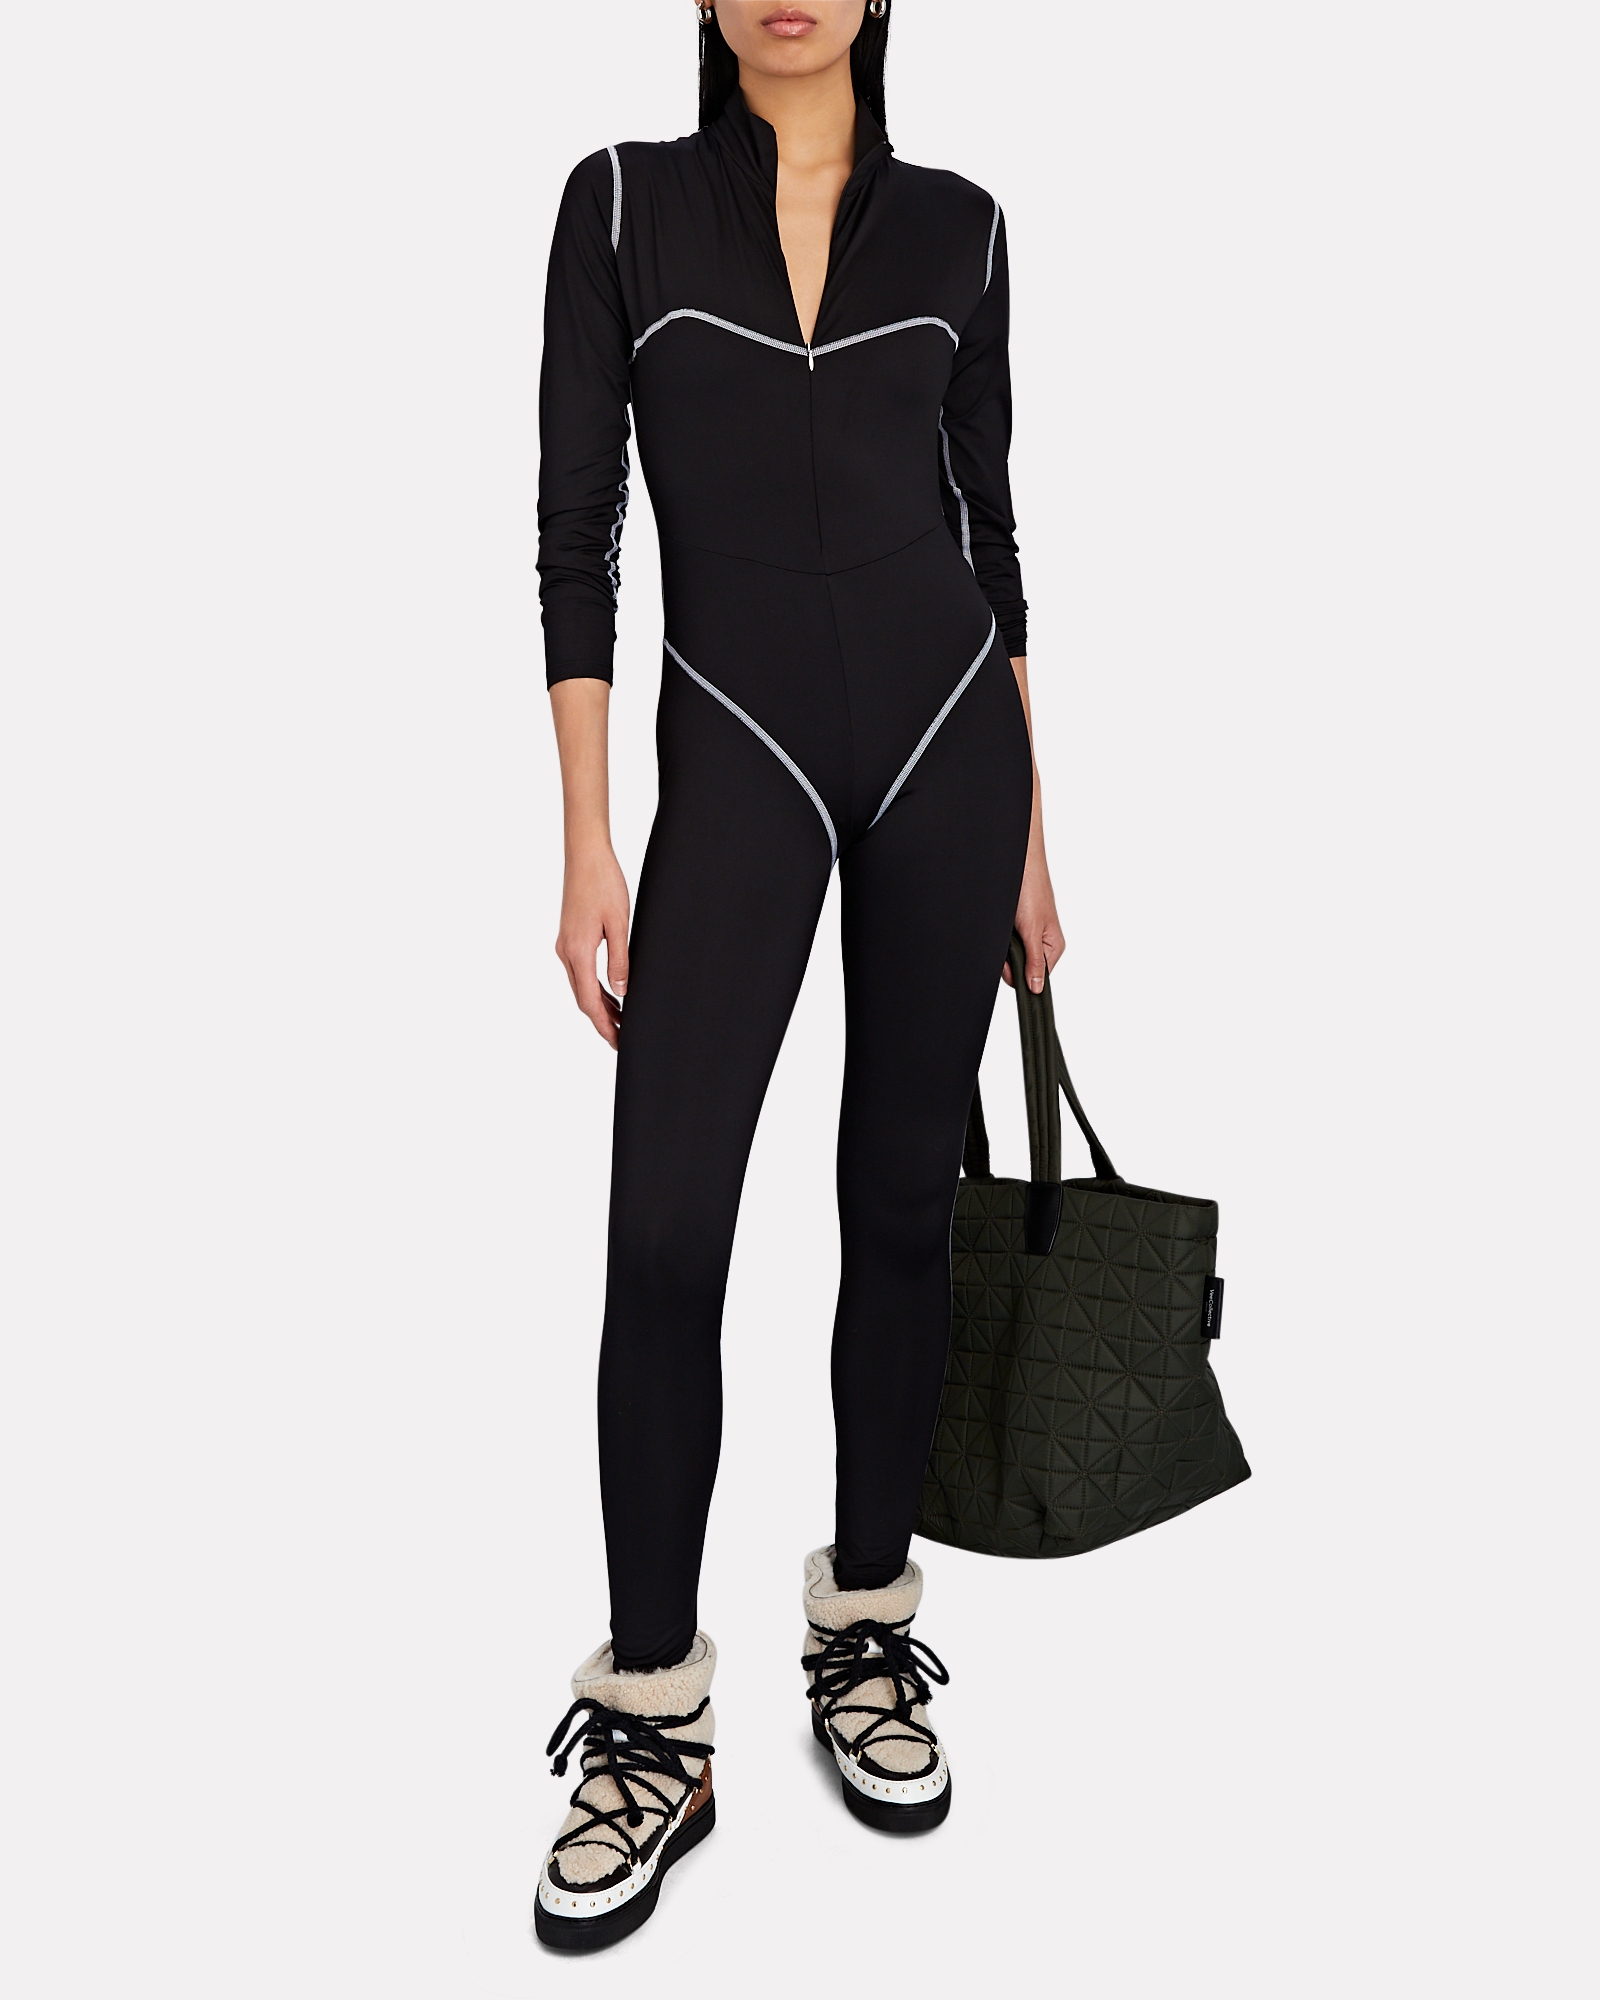 CORDOVA Dolomite Ski Suit in Black Womens Clothing Suits 